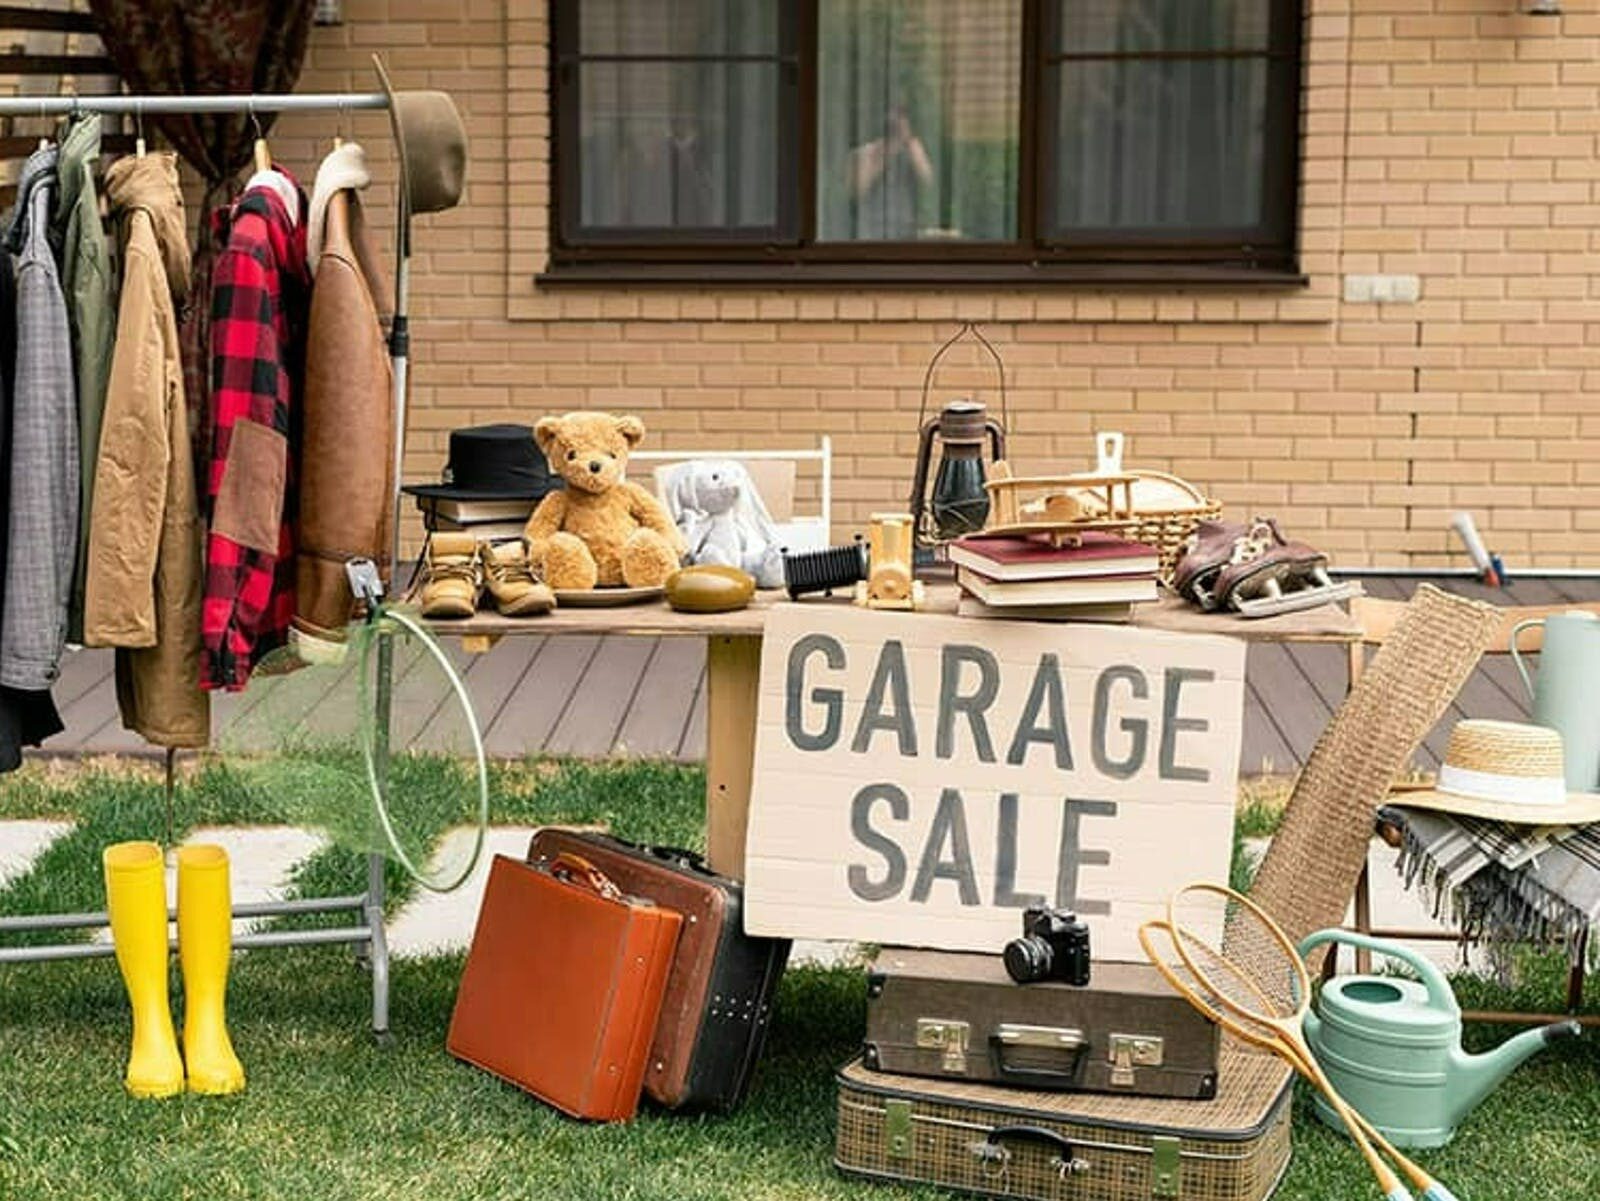 Make sure you grab a map and visit the participating garage sale properties